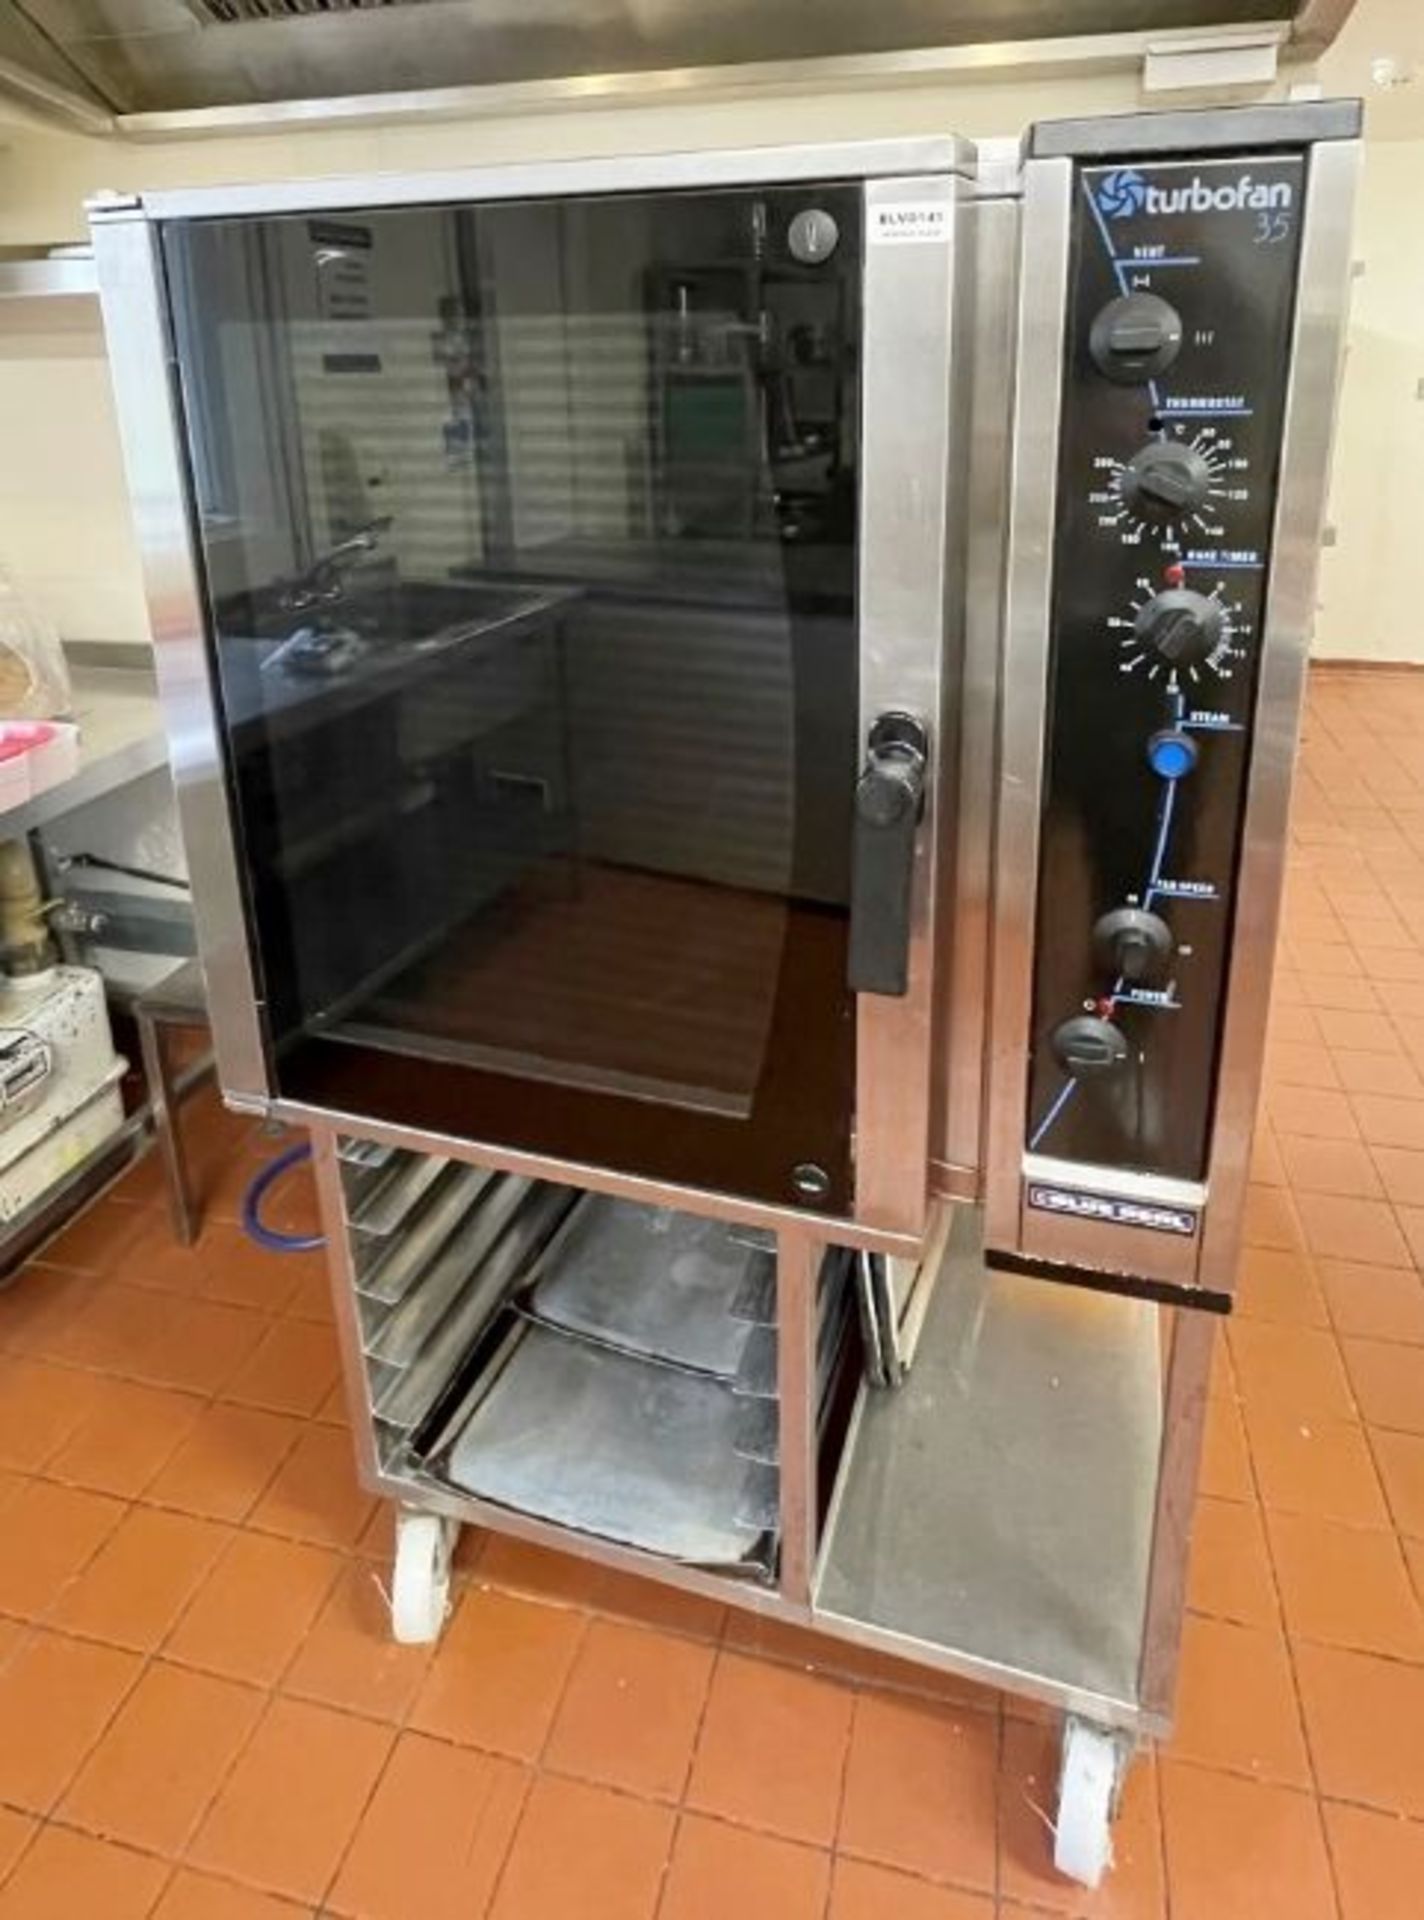 1 x Blue Seal Moffat Turbofan E35 Convection Oven With Stand - Model E35-30-453 - 400v Power - - Image 5 of 16